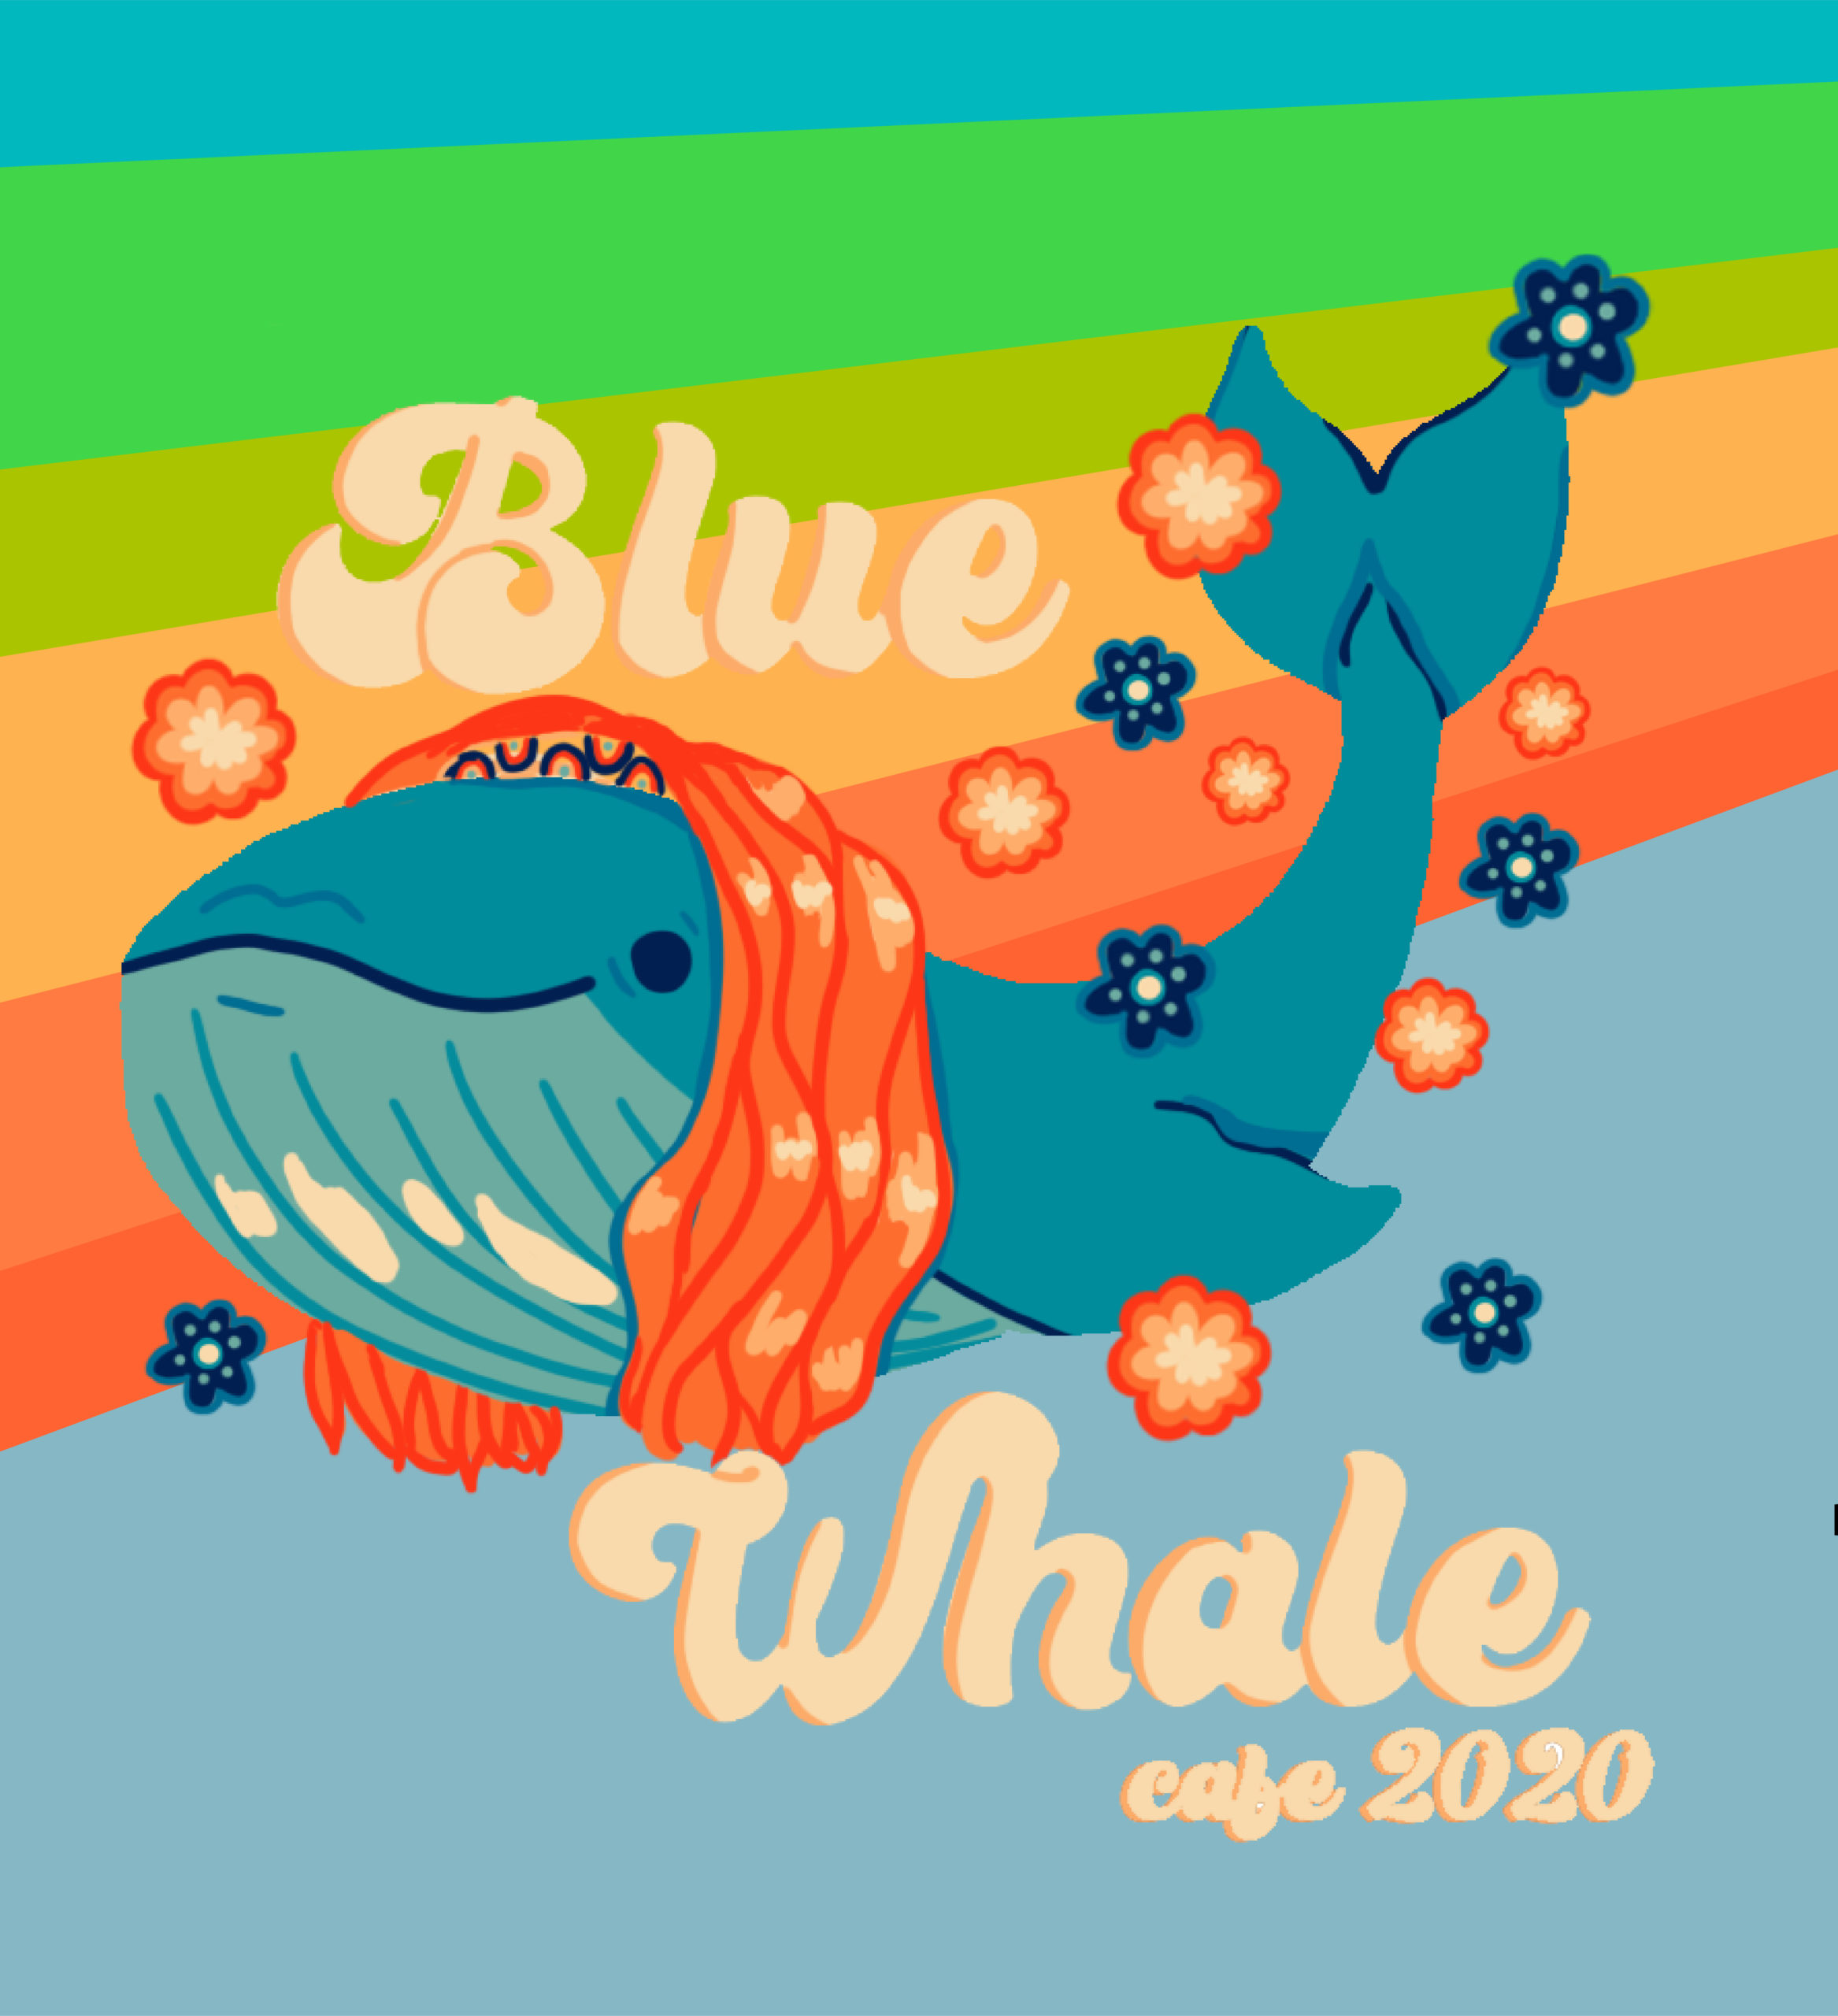 Blue Whale Cafe design by Dilyn Halverson